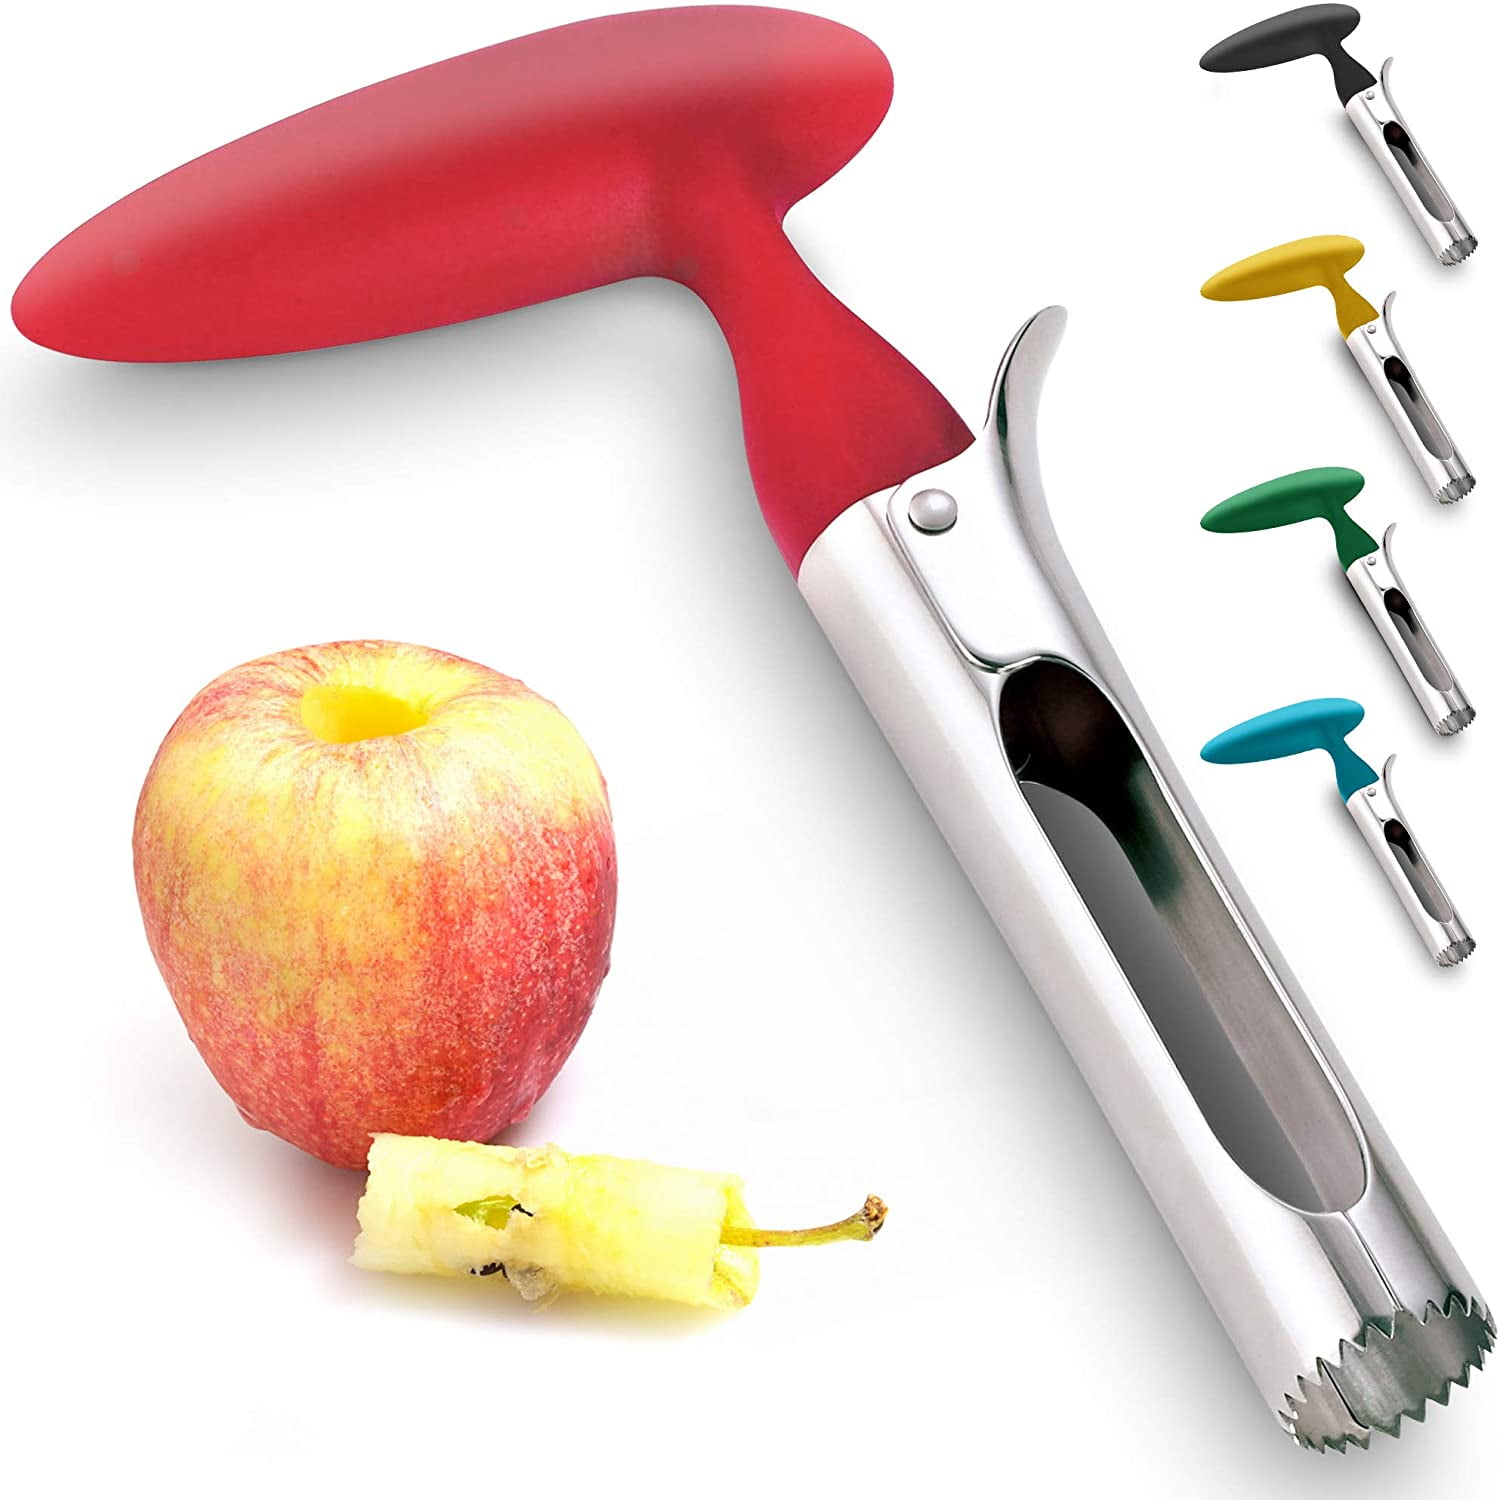 Apple Corer Stainless Steel Kitchen Gadget Fruit Core Remover. 